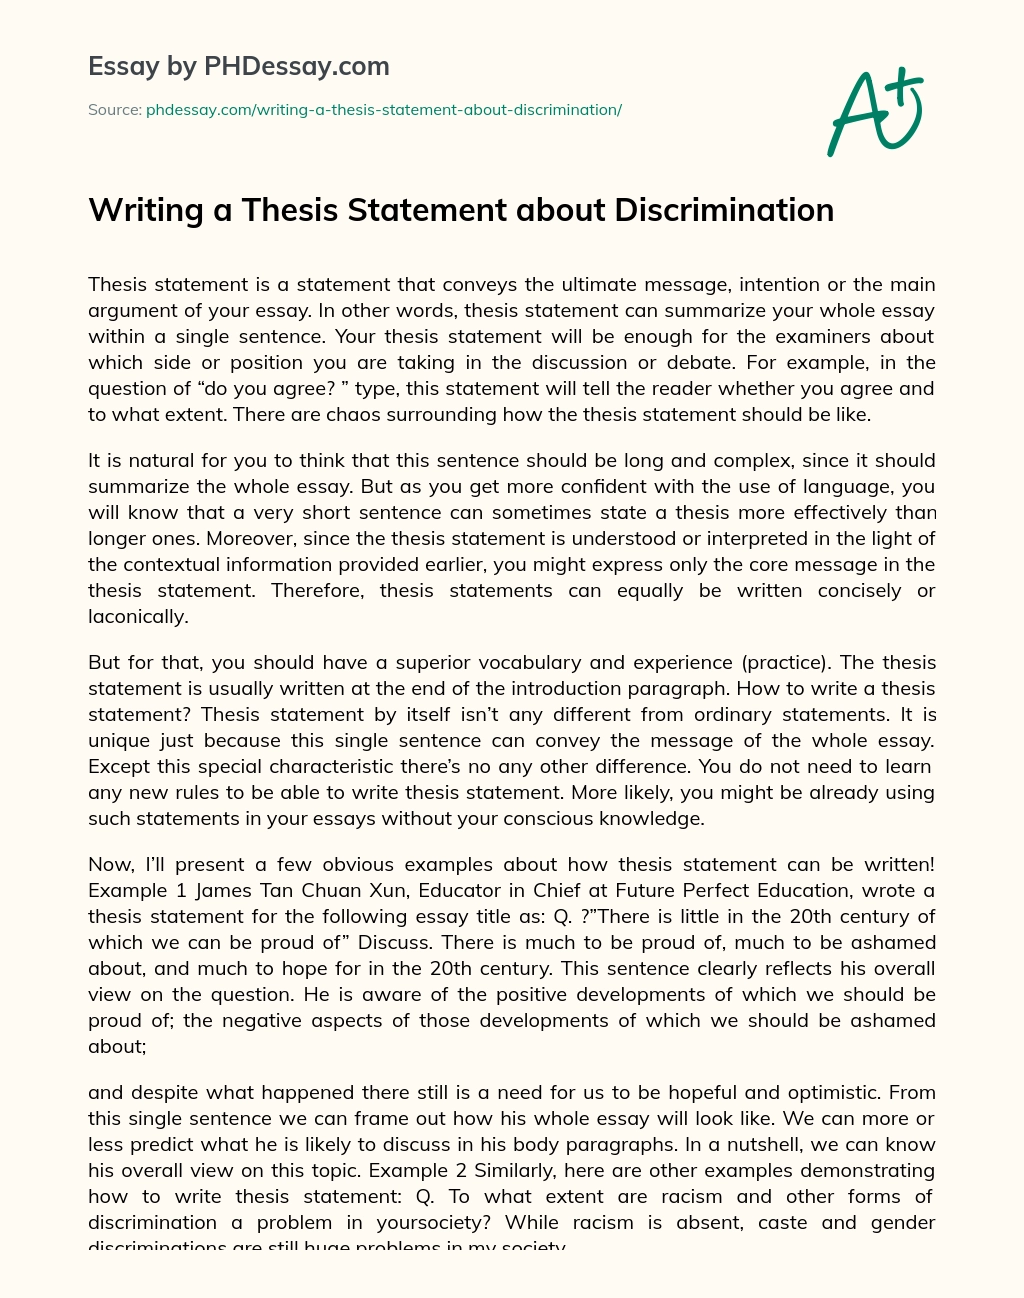 Writing a Thesis Statement about Discrimination essay